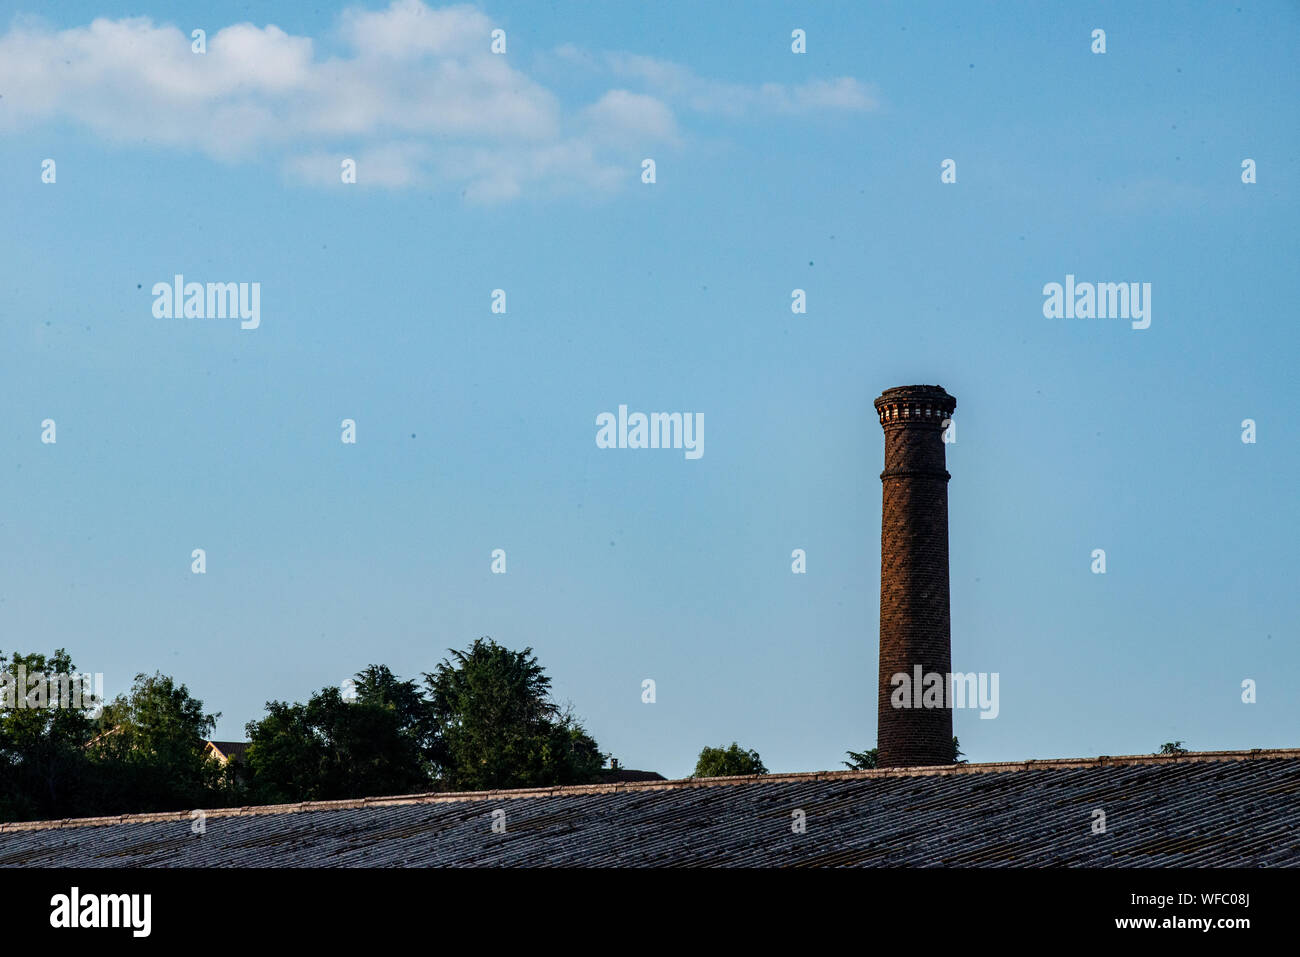 Red brick chimney against blue sky Stock Photo